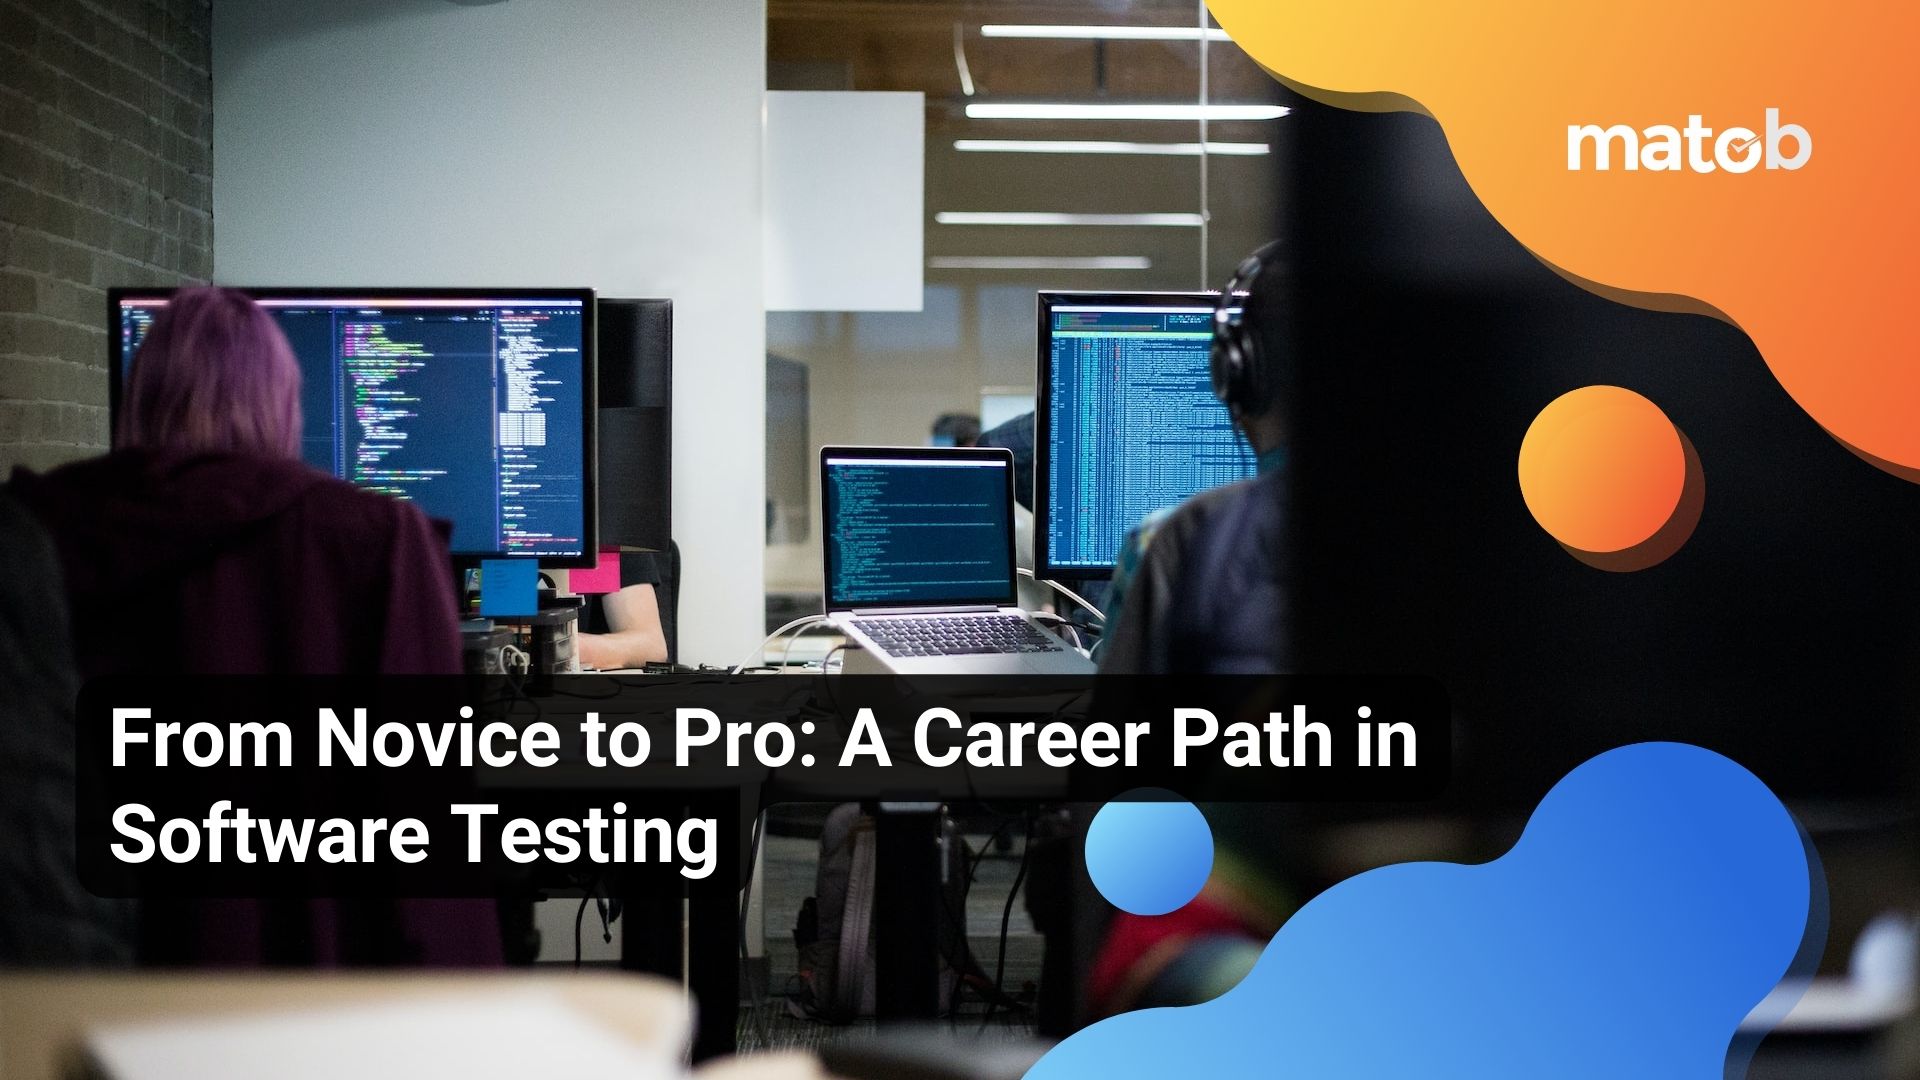 From Novice to Pro: A Career Path in Software Testing